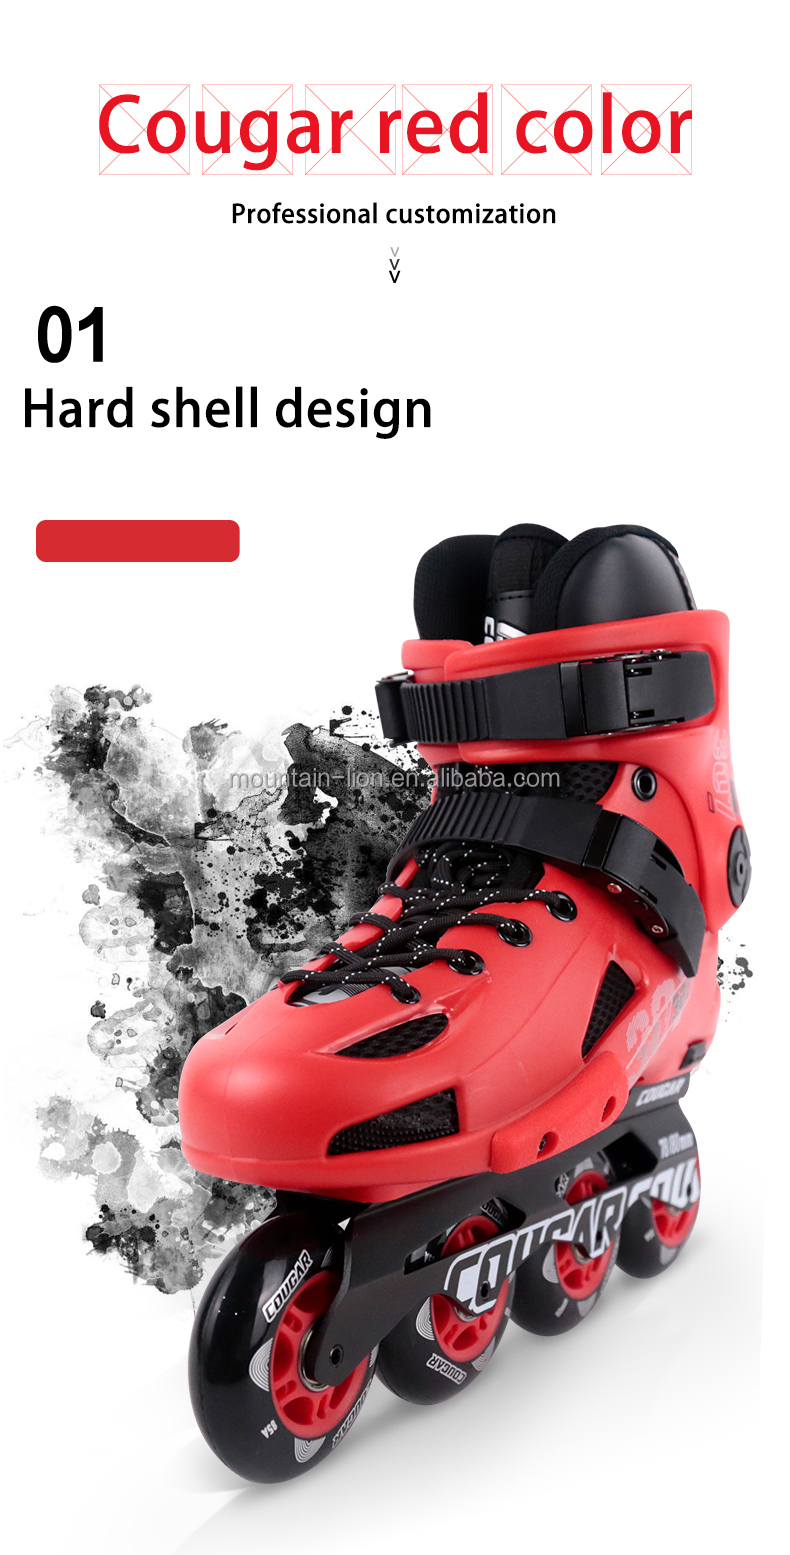 Wholesale Good Quality Red Roller Skating Shoes for Sale Adult Skates Patins Free Skill Urban Slalom Skates,MZS307C